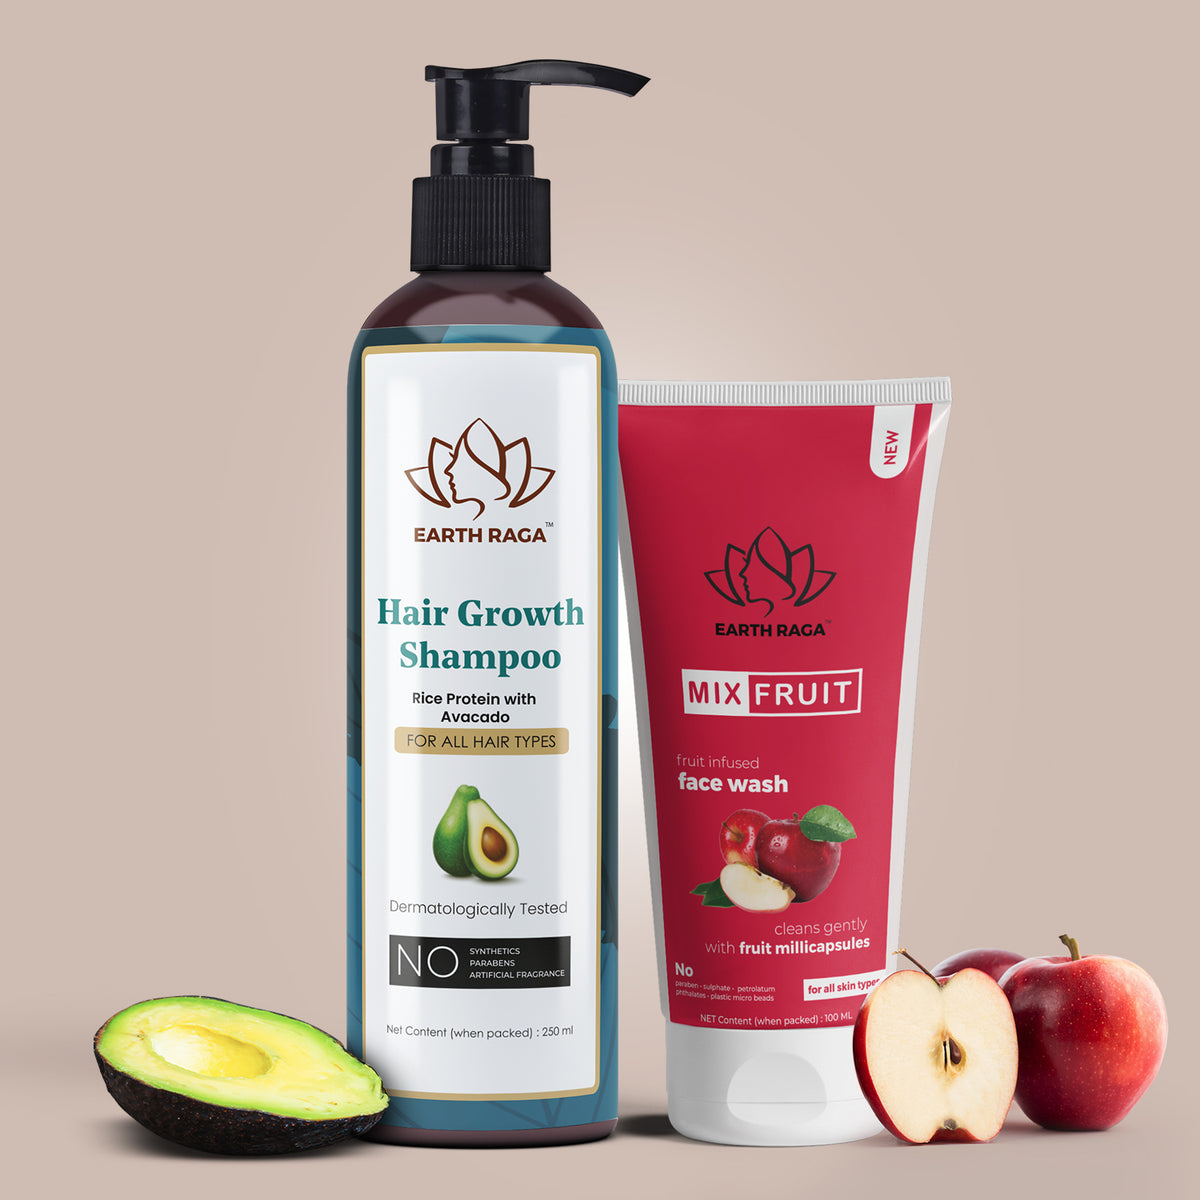 Hair Growth Shampoo and Mix Fruit Face Wash Combo